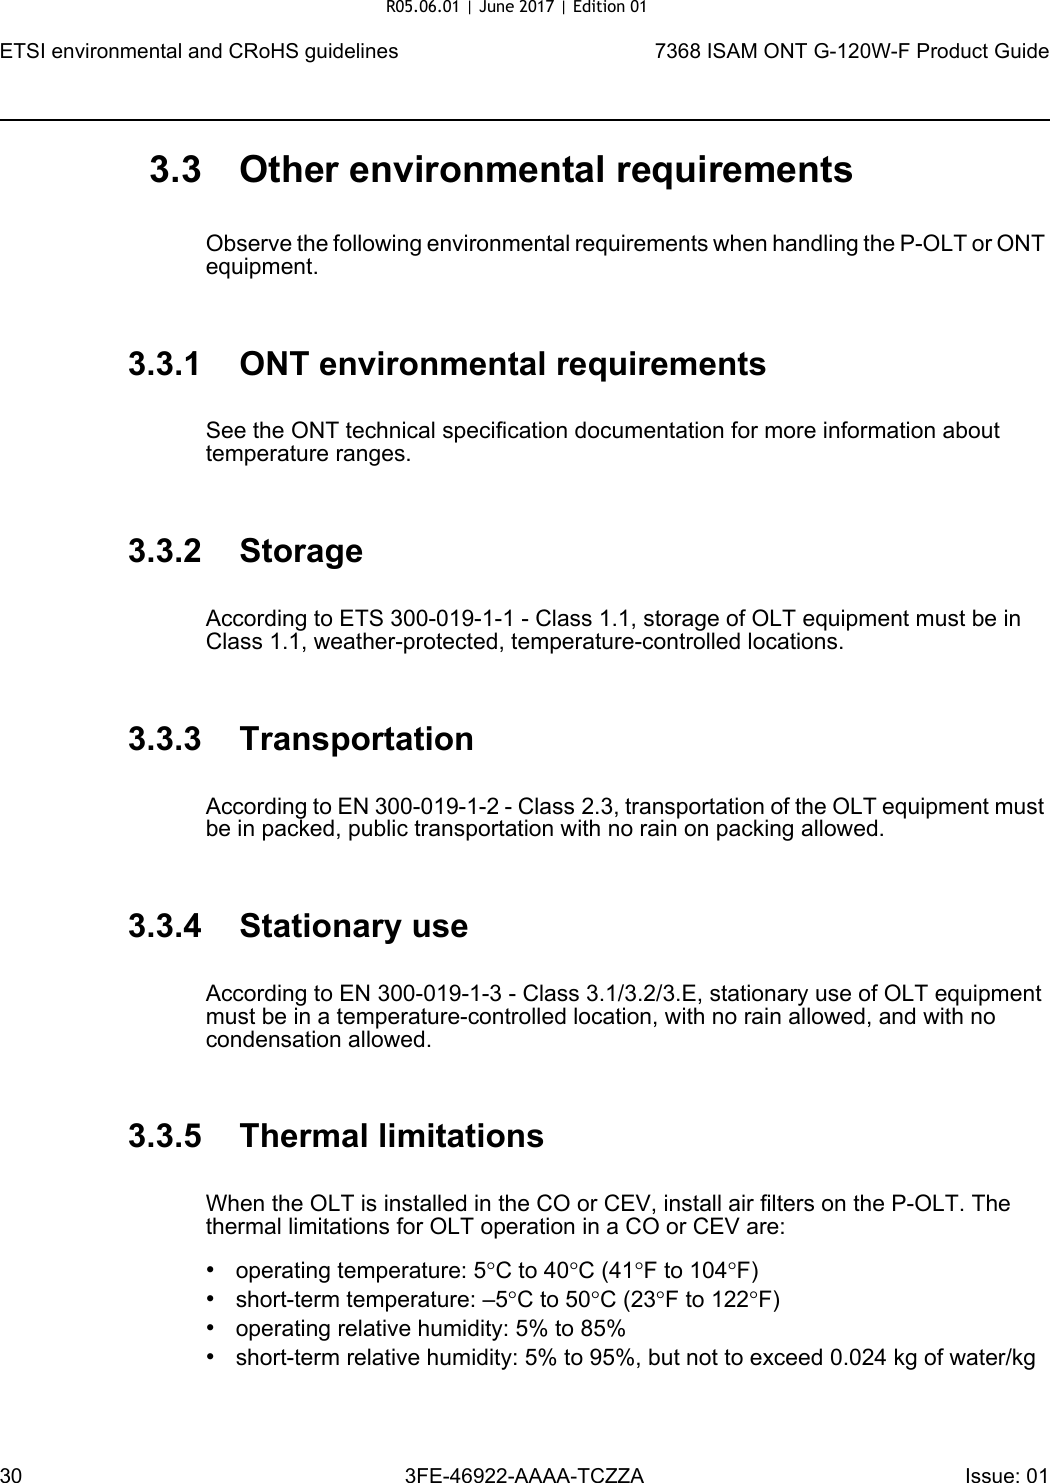 ETSI environmental and CRoHS guidelines307368 ISAM ONT G-120W-F Product Guide3FE-46922-AAAA-TCZZA Issue: 01 3.3 Other environmental requirementsObserve the following environmental requirements when handling the P-OLT or ONT equipment.3.3.1 ONT environmental requirementsSee the ONT technical specification documentation for more information about temperature ranges.3.3.2 StorageAccording to ETS 300-019-1-1 - Class 1.1, storage of OLT equipment must be in Class 1.1, weather-protected, temperature-controlled locations.3.3.3 TransportationAccording to EN 300-019-1-2 - Class 2.3, transportation of the OLT equipment must be in packed, public transportation with no rain on packing allowed.3.3.4 Stationary useAccording to EN 300-019-1-3 - Class 3.1/3.2/3.E, stationary use of OLT equipment must be in a temperature-controlled location, with no rain allowed, and with no condensation allowed.3.3.5 Thermal limitationsWhen the OLT is installed in the CO or CEV, install air filters on the P-OLT. The thermal limitations for OLT operation in a CO or CEV are:•operating temperature: 5°C to 40°C (41°F to 104°F)•short-term temperature: –5°C to 50°C (23°F to 122°F)•operating relative humidity: 5% to 85%•short-term relative humidity: 5% to 95%, but not to exceed 0.024 kg of water/kgR05.06.01 | June 2017 | Edition 01 